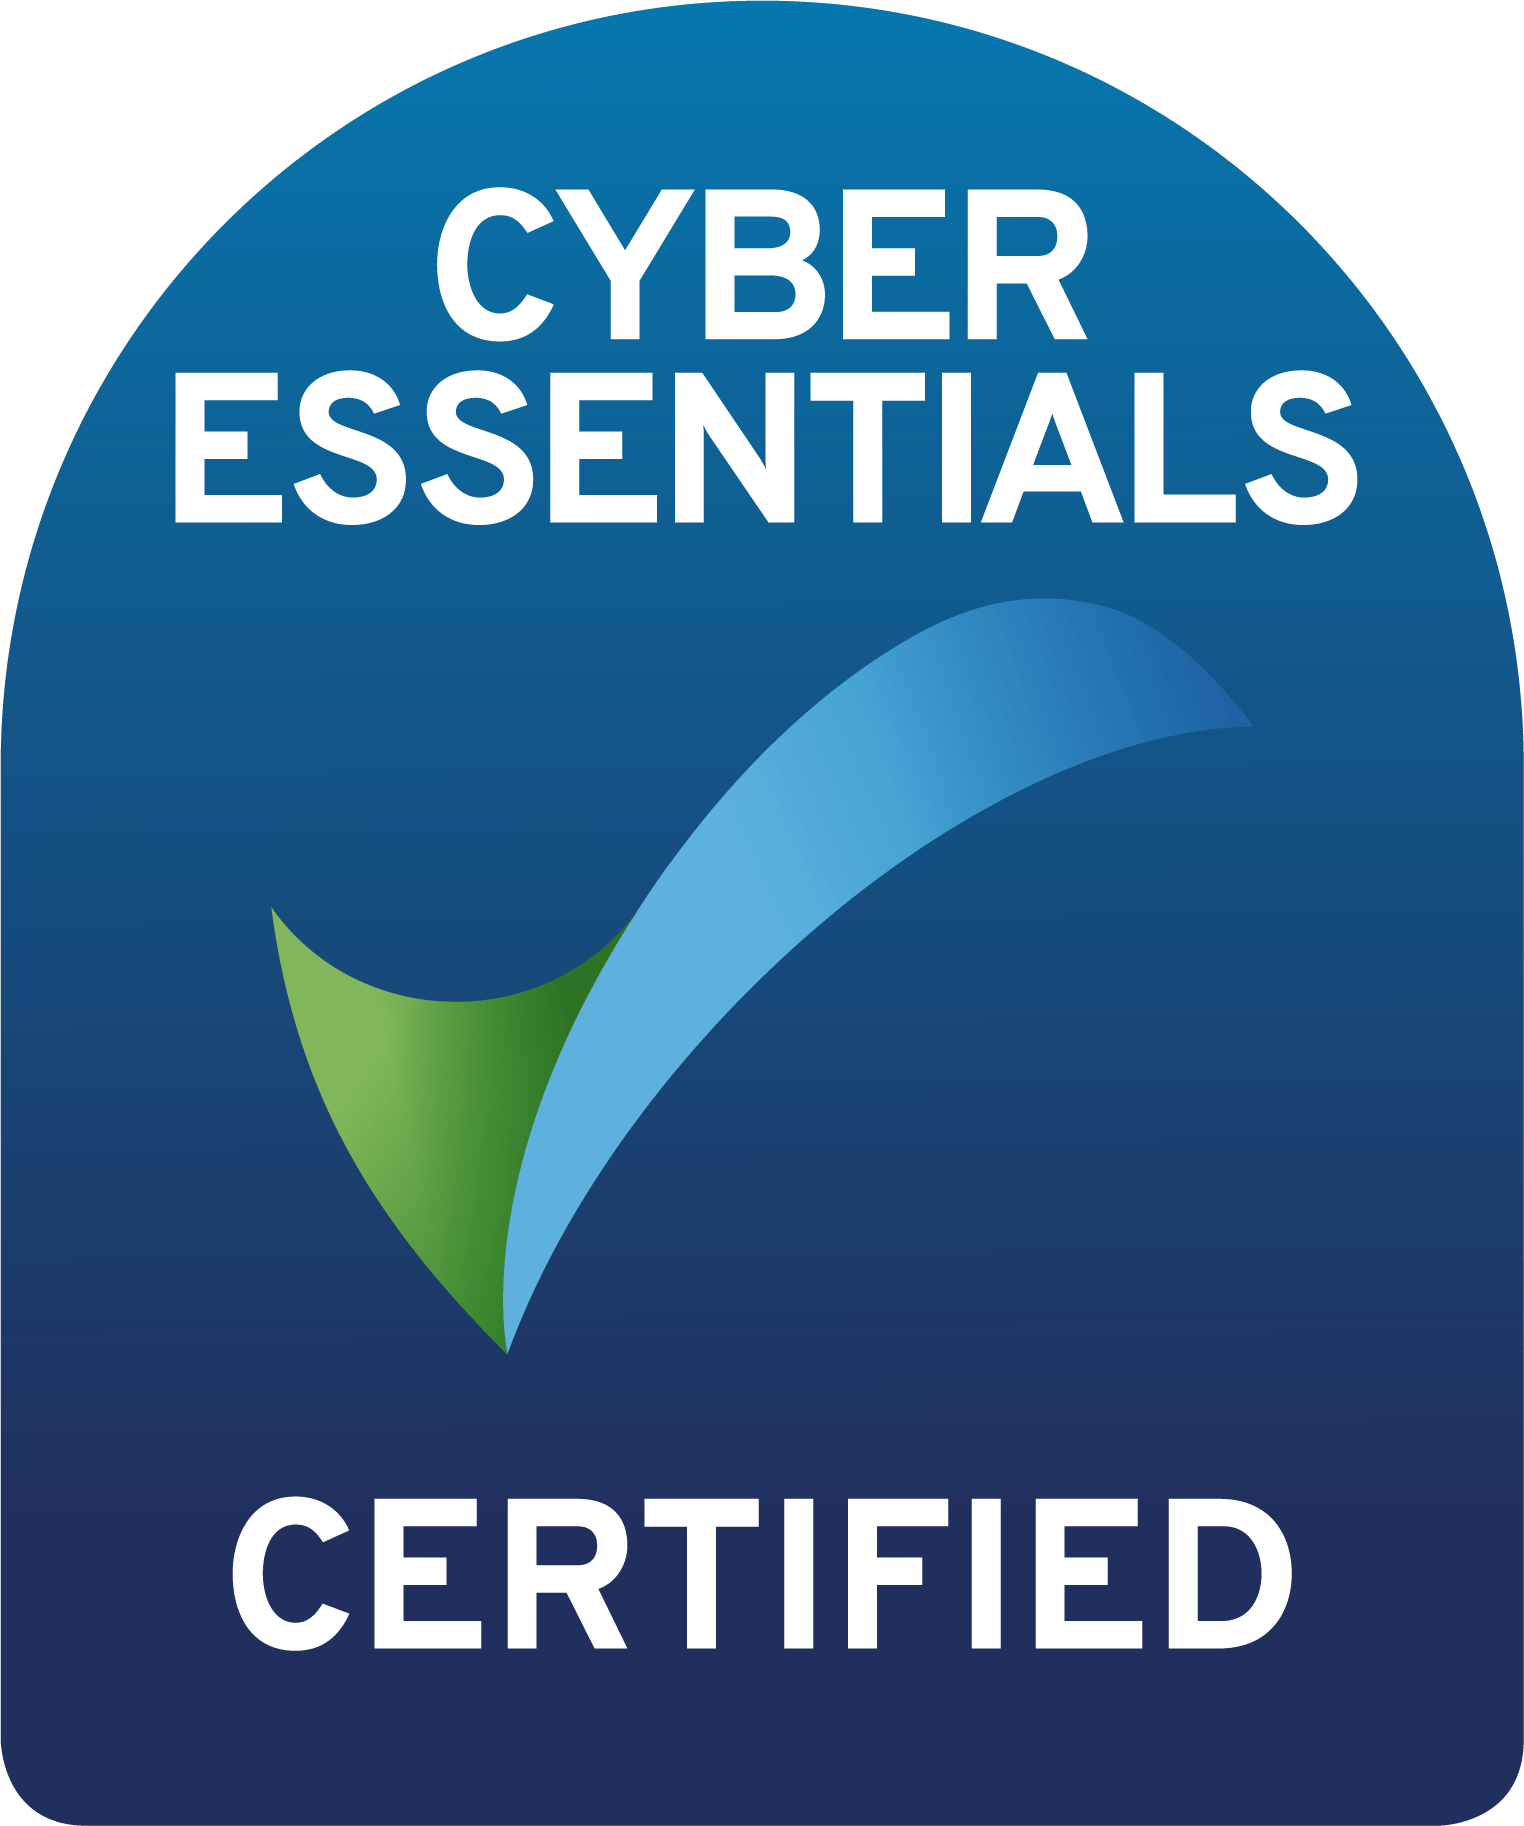 Image showing Cyber Essentials certification mark colour